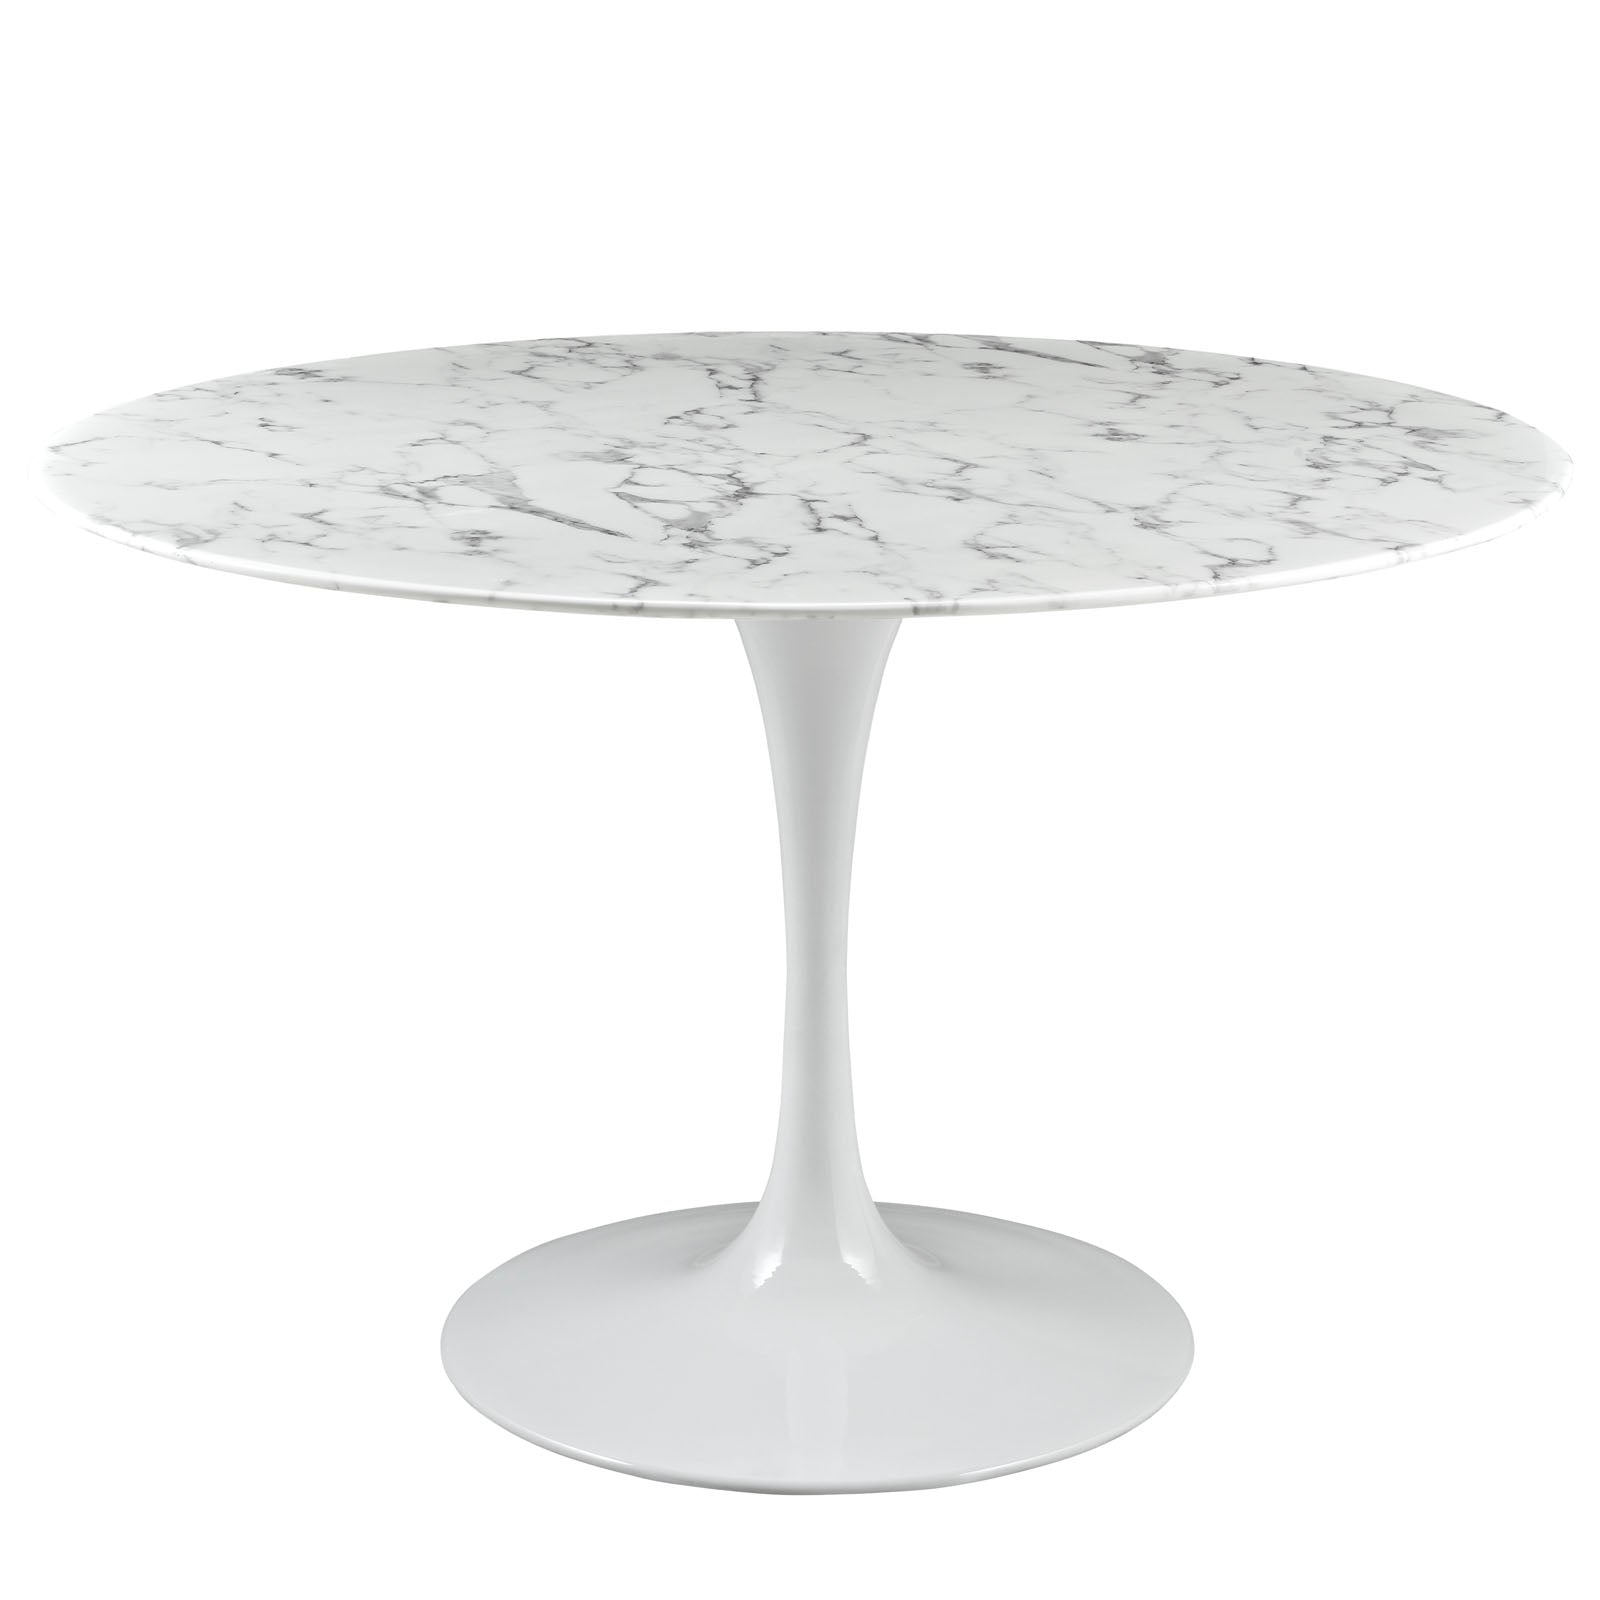 Lippa 47" Round Artifical Marble Dining Room Table Set - Modern Dining Table Set